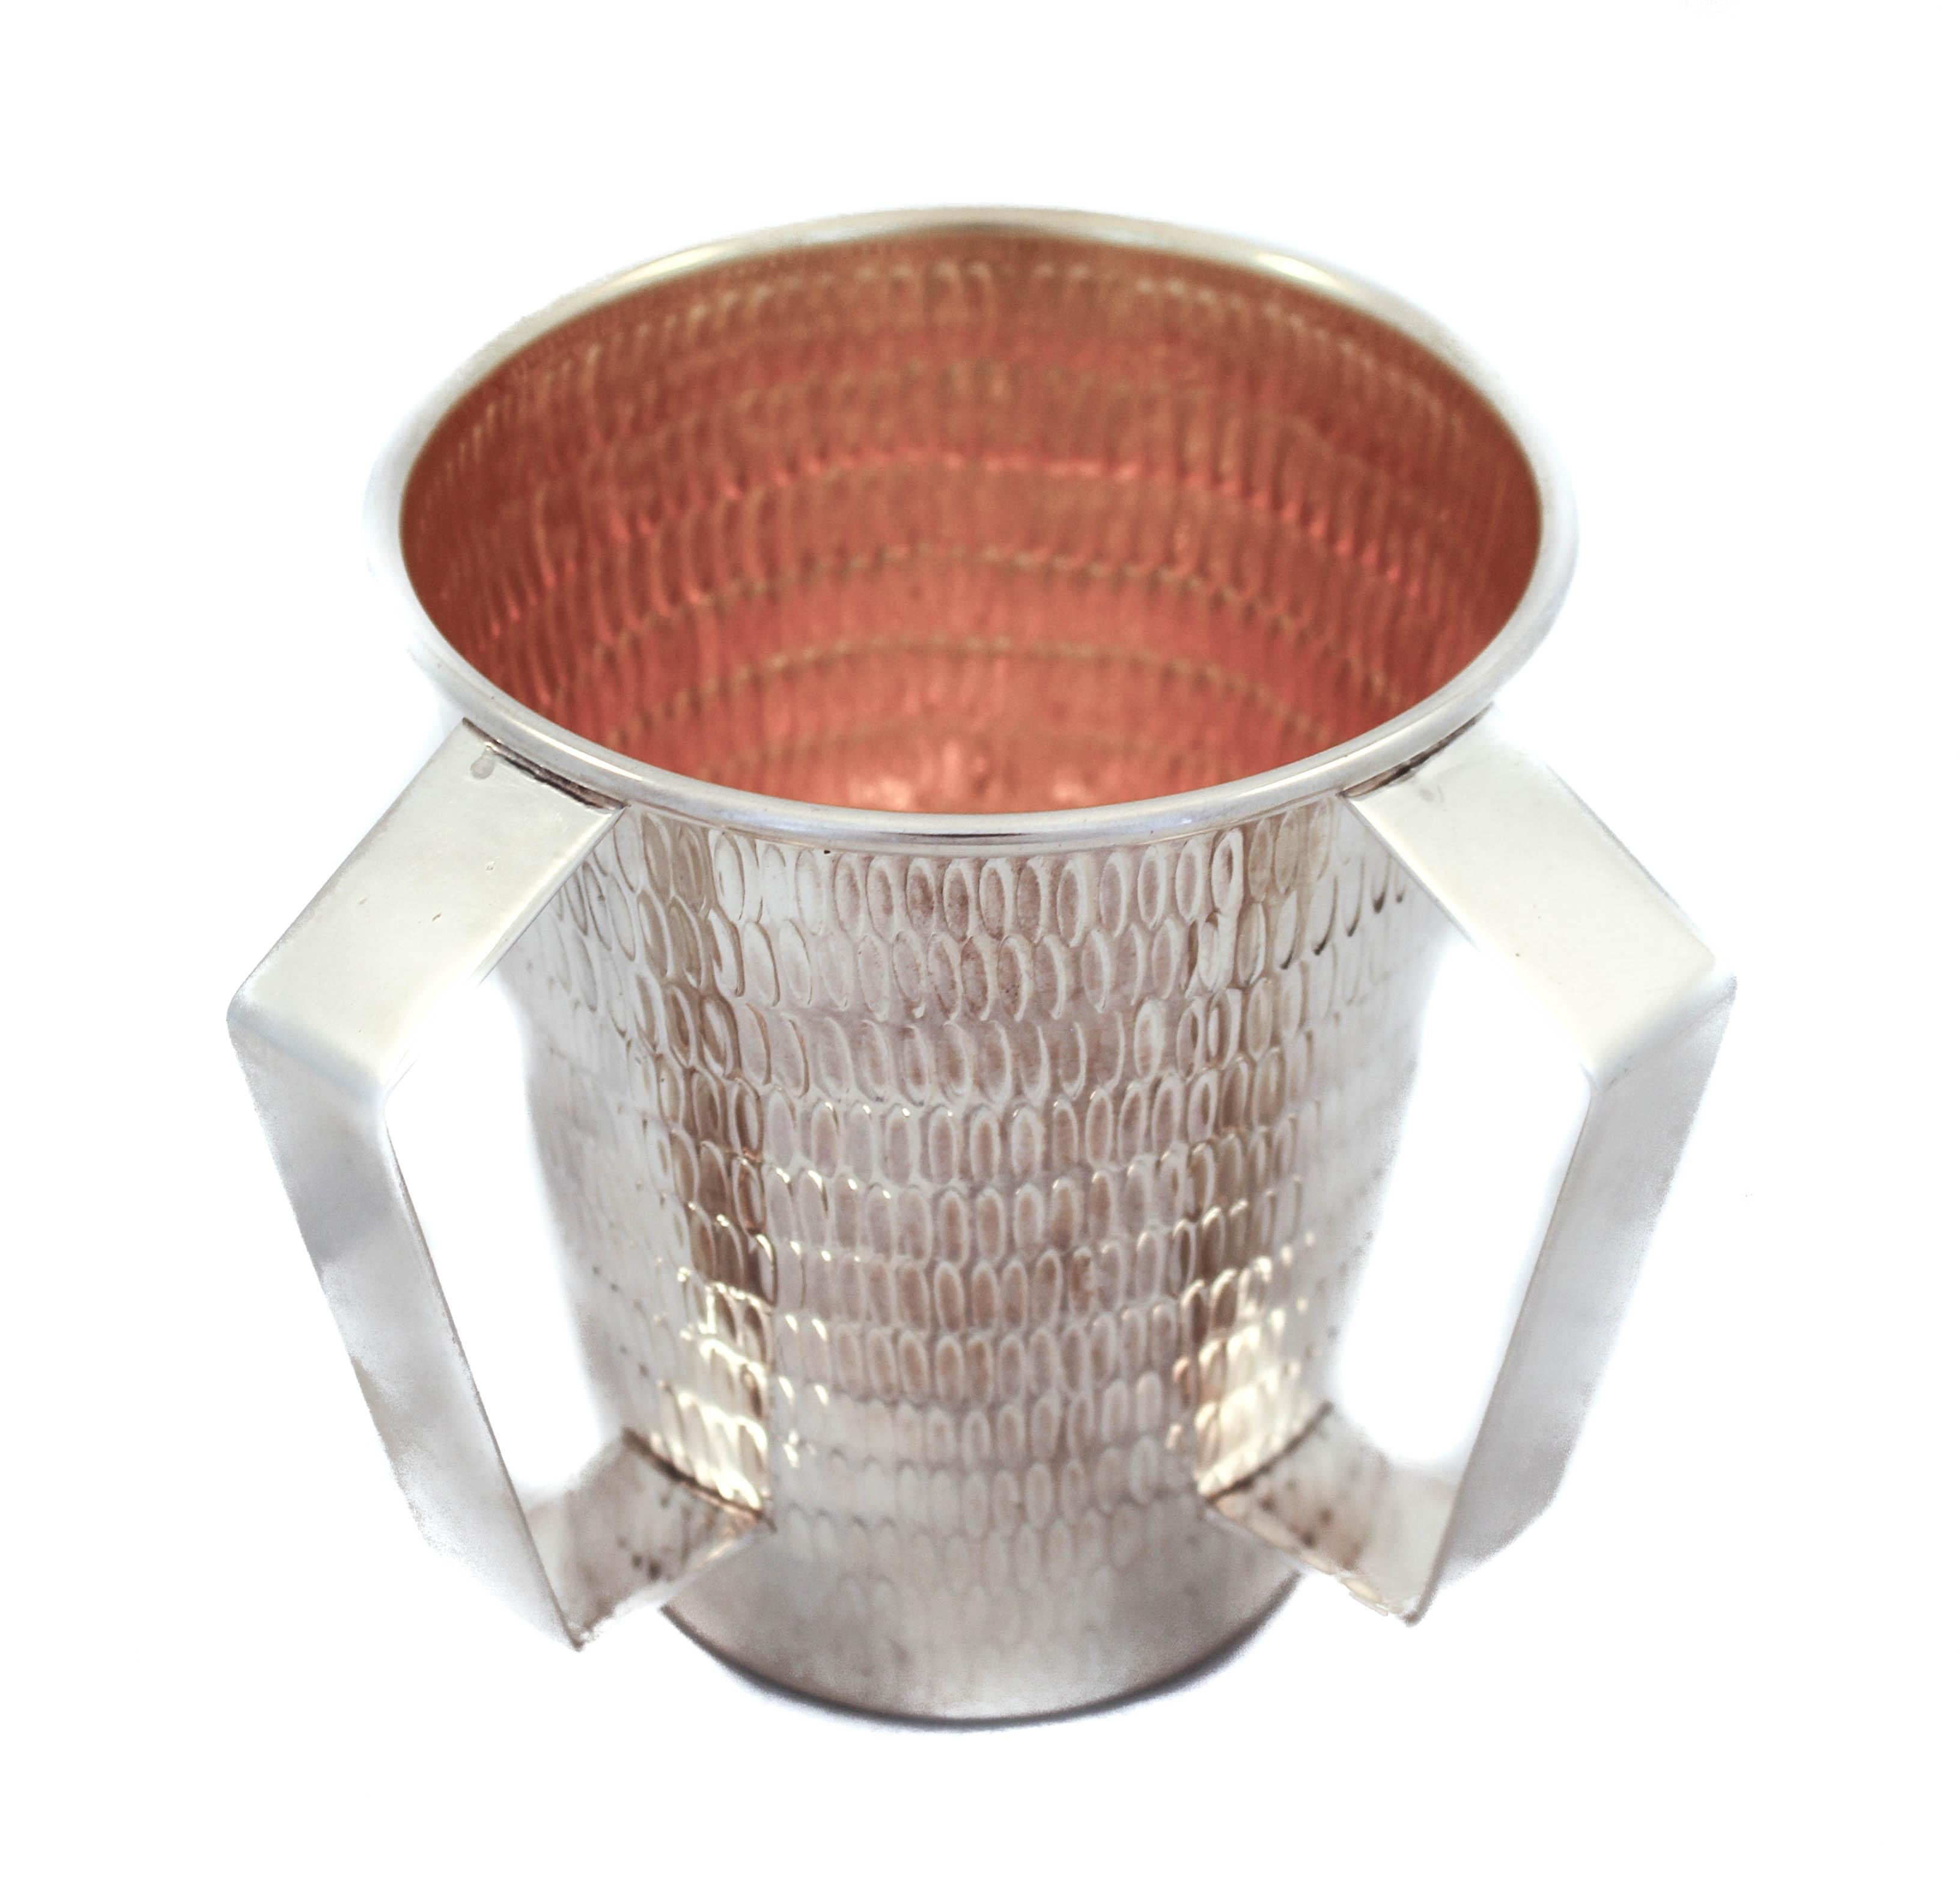 Being offered is a sterling silver washing cup (N’tillat Yadaiyim cup). This item is used to wash ones hands either before eating bread or performing religious requirements in the Jewish faith. 
It has a modern shape and design. Notice the straight